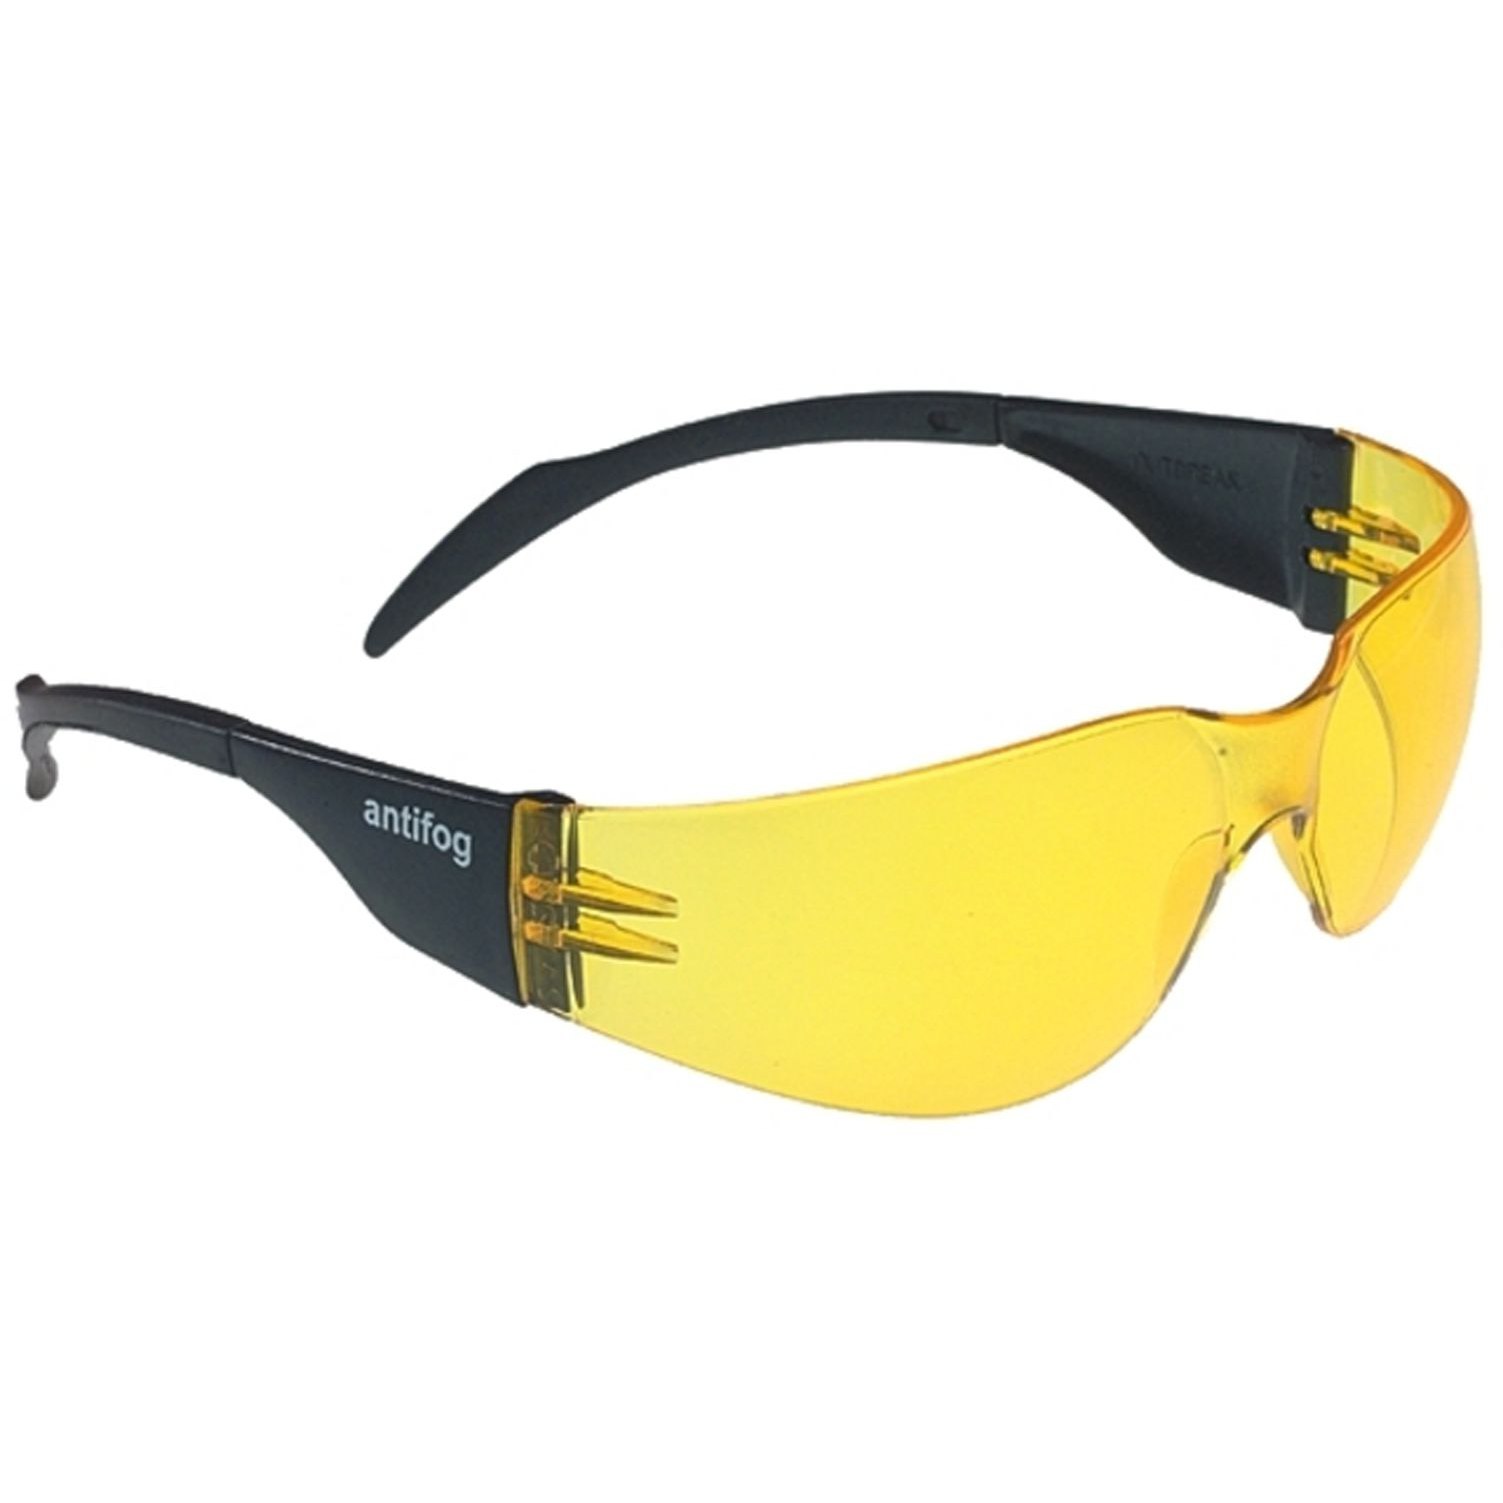 Picture of Swiss Eye Outbreak Glasses 14004 - Black - Yellow